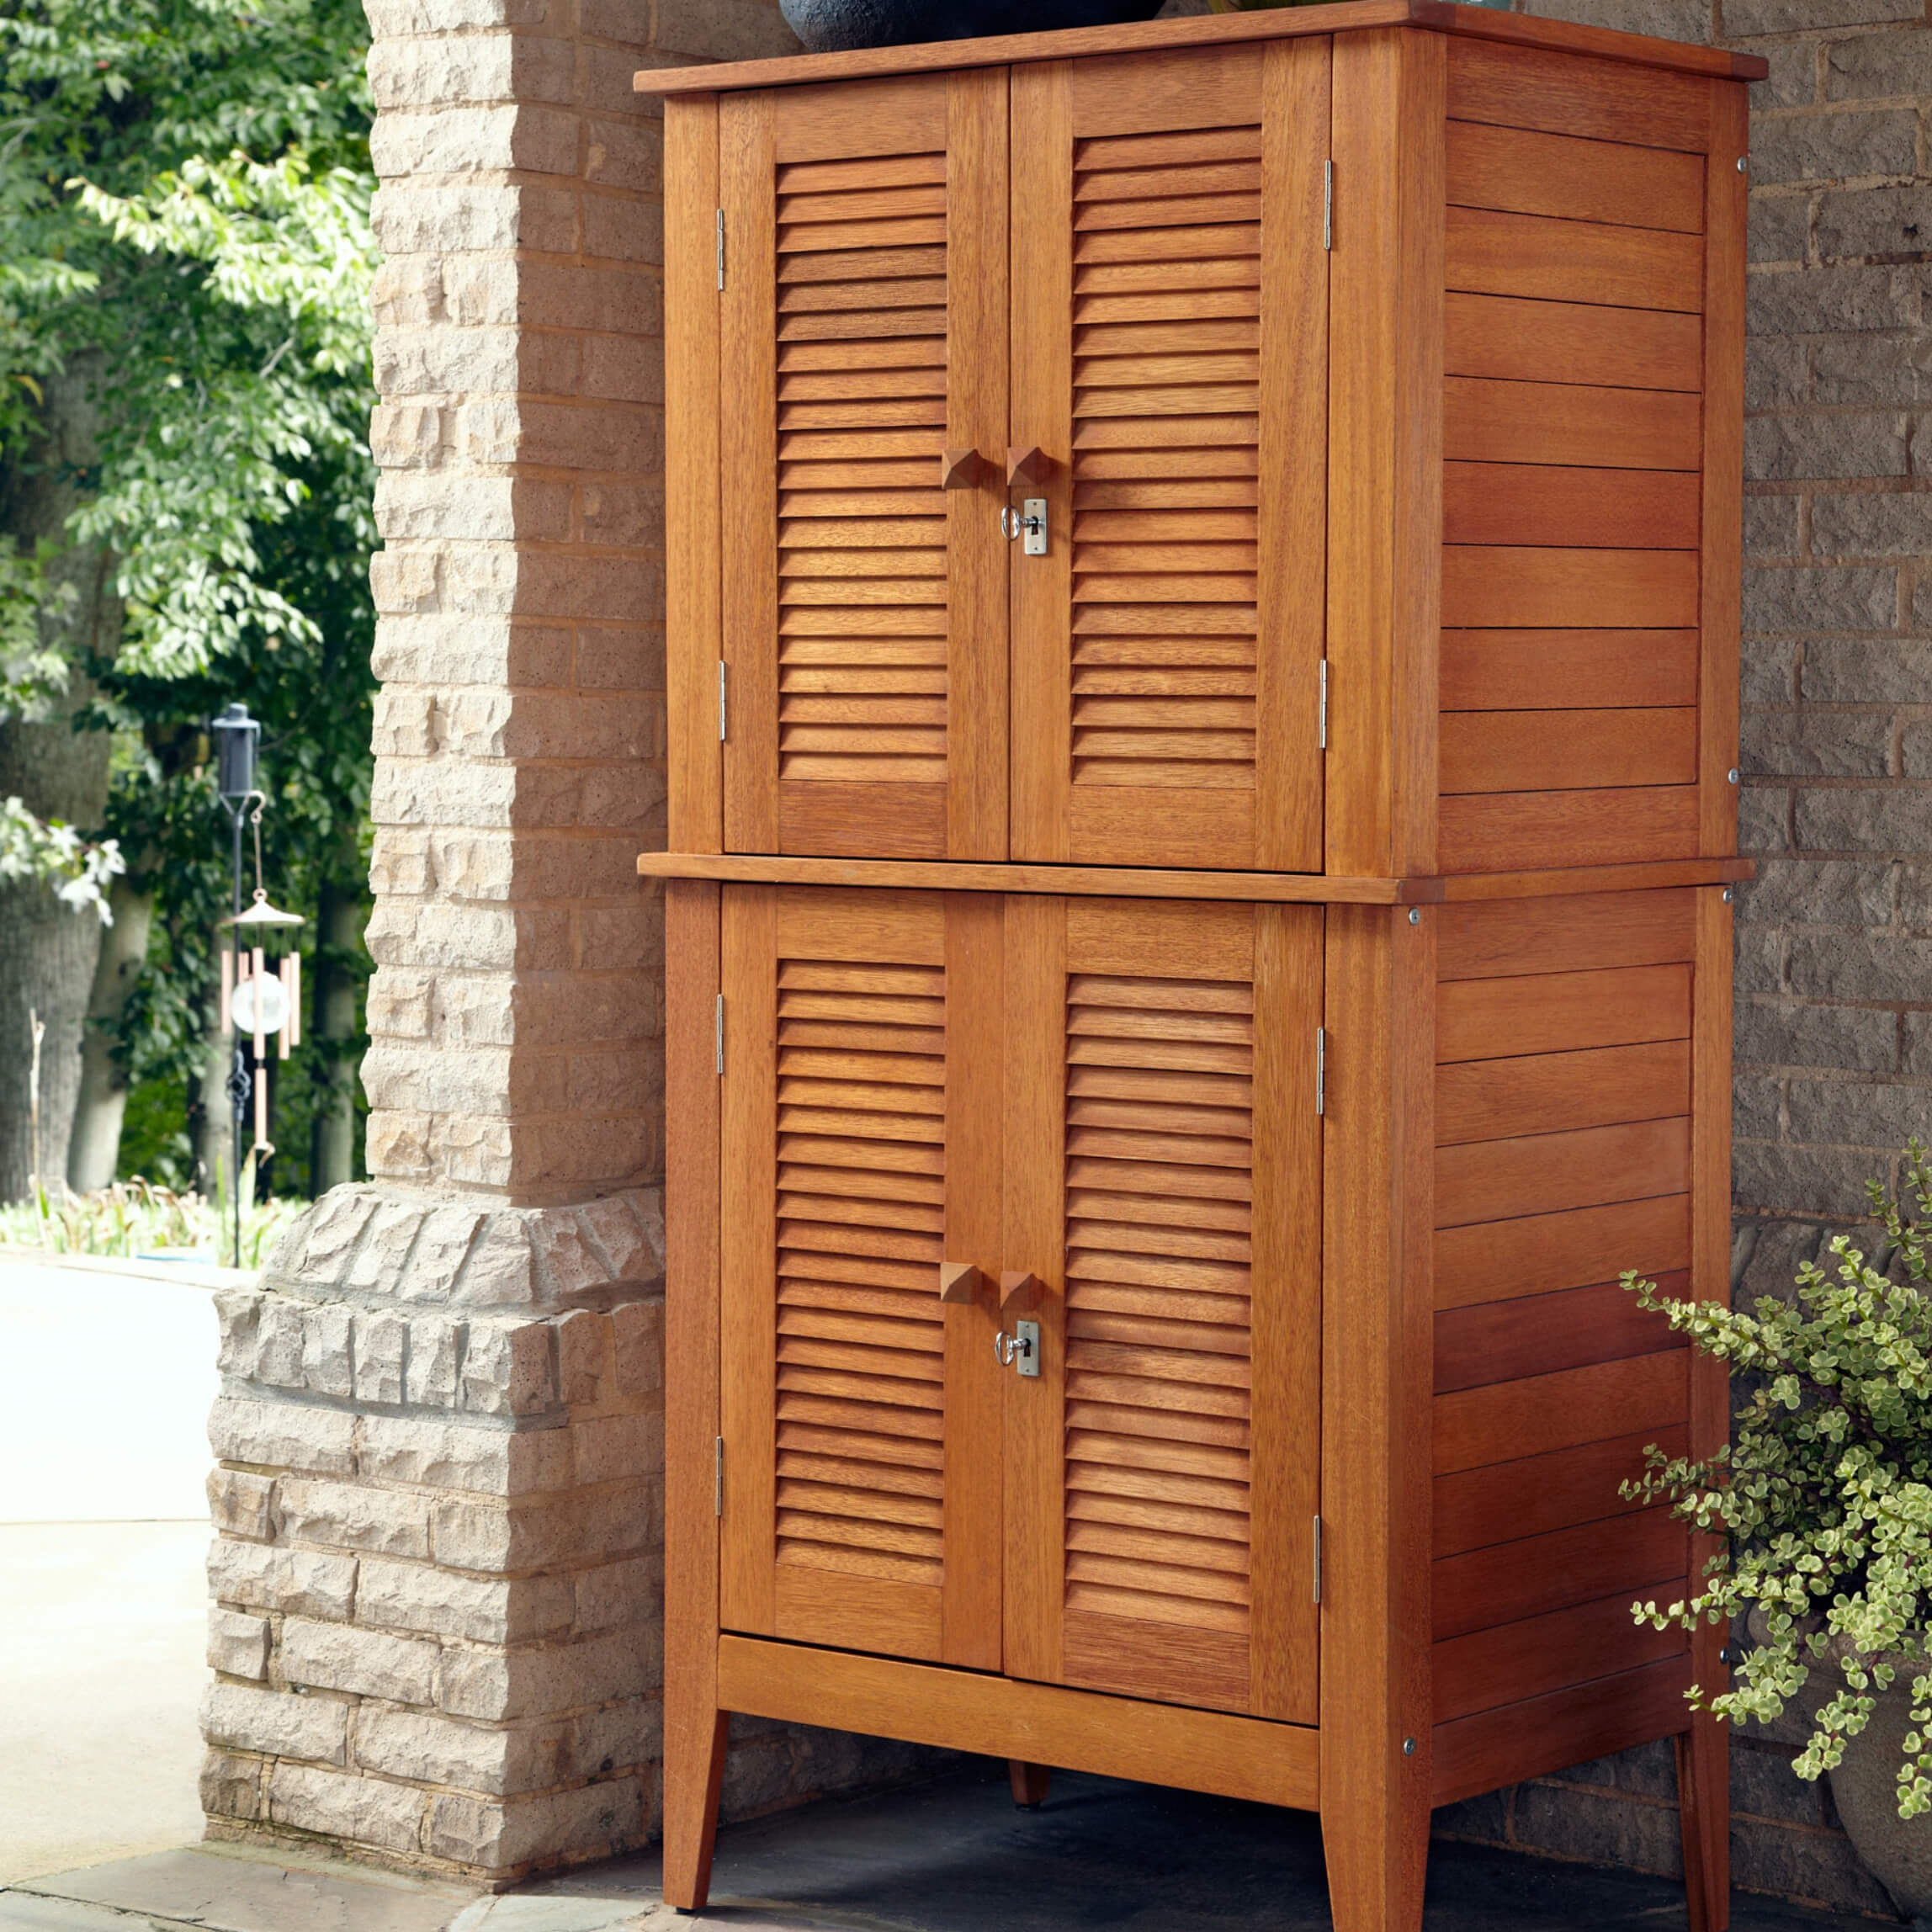 Top 10 Types Of Outdoor Deck Storage Boxes throughout sizing 2296 X 2296